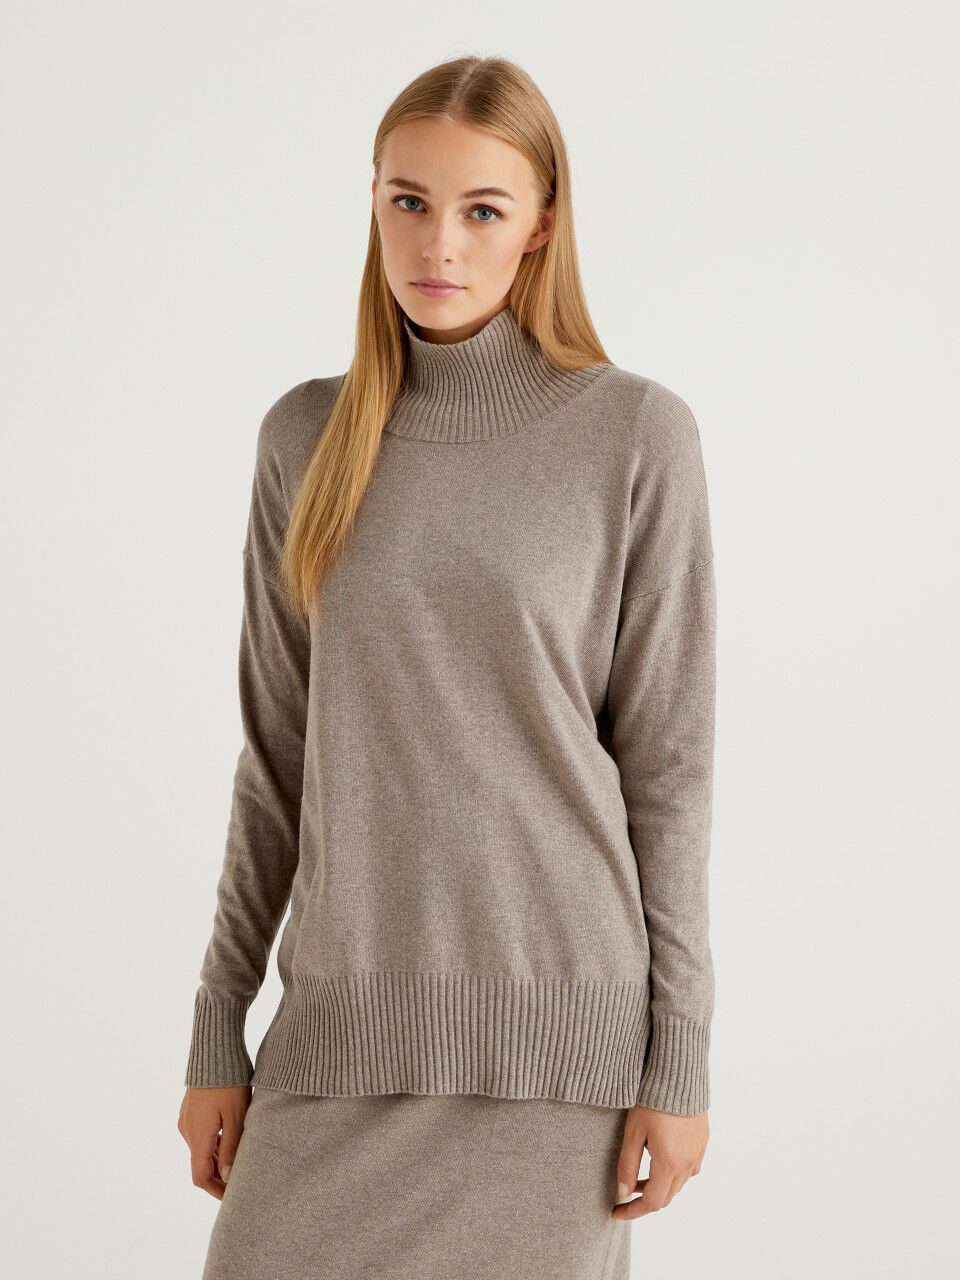 Turtleneck in silk and cashmere blend